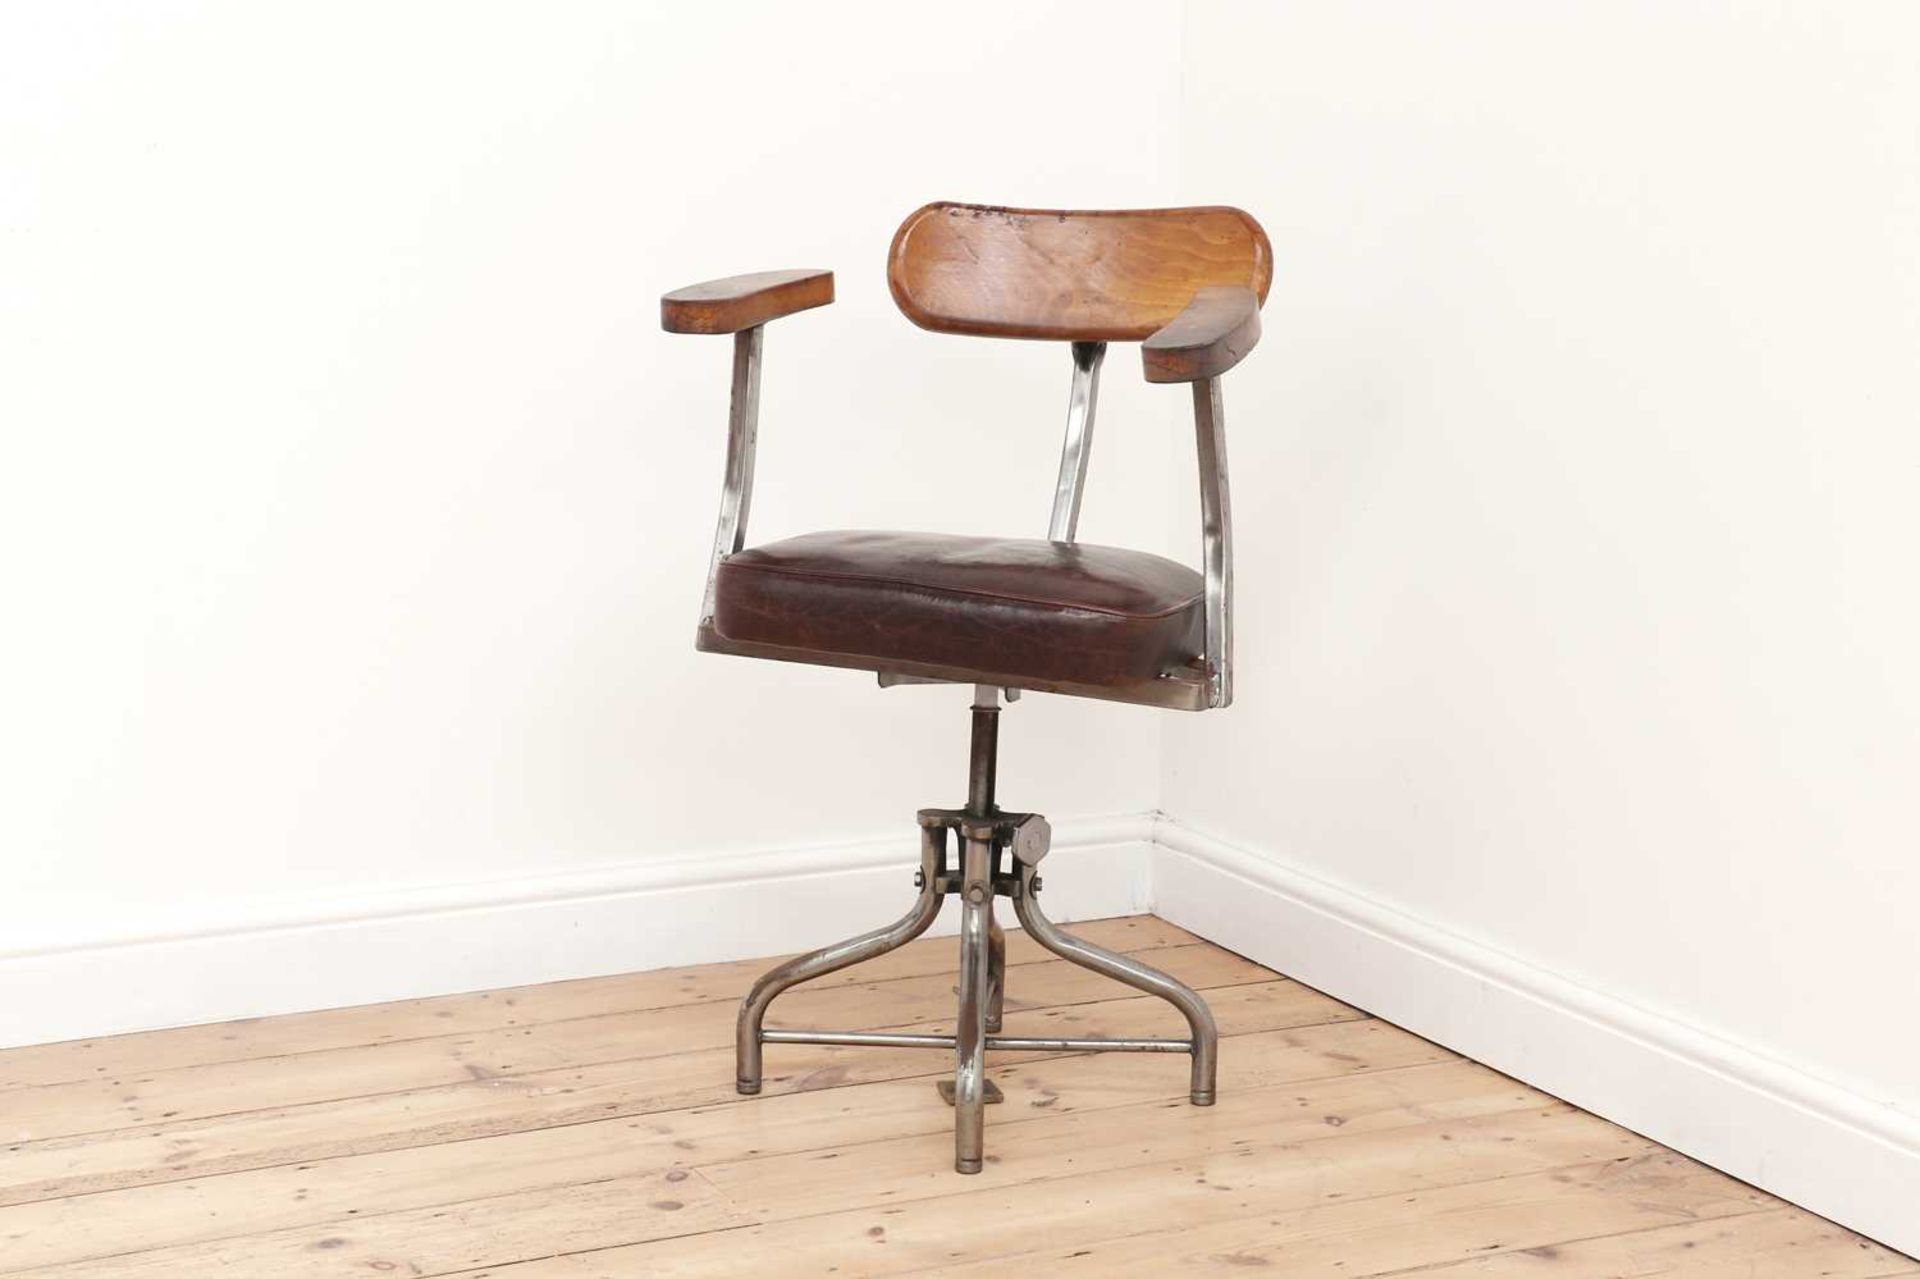 An industrial steel and leather desk chair,